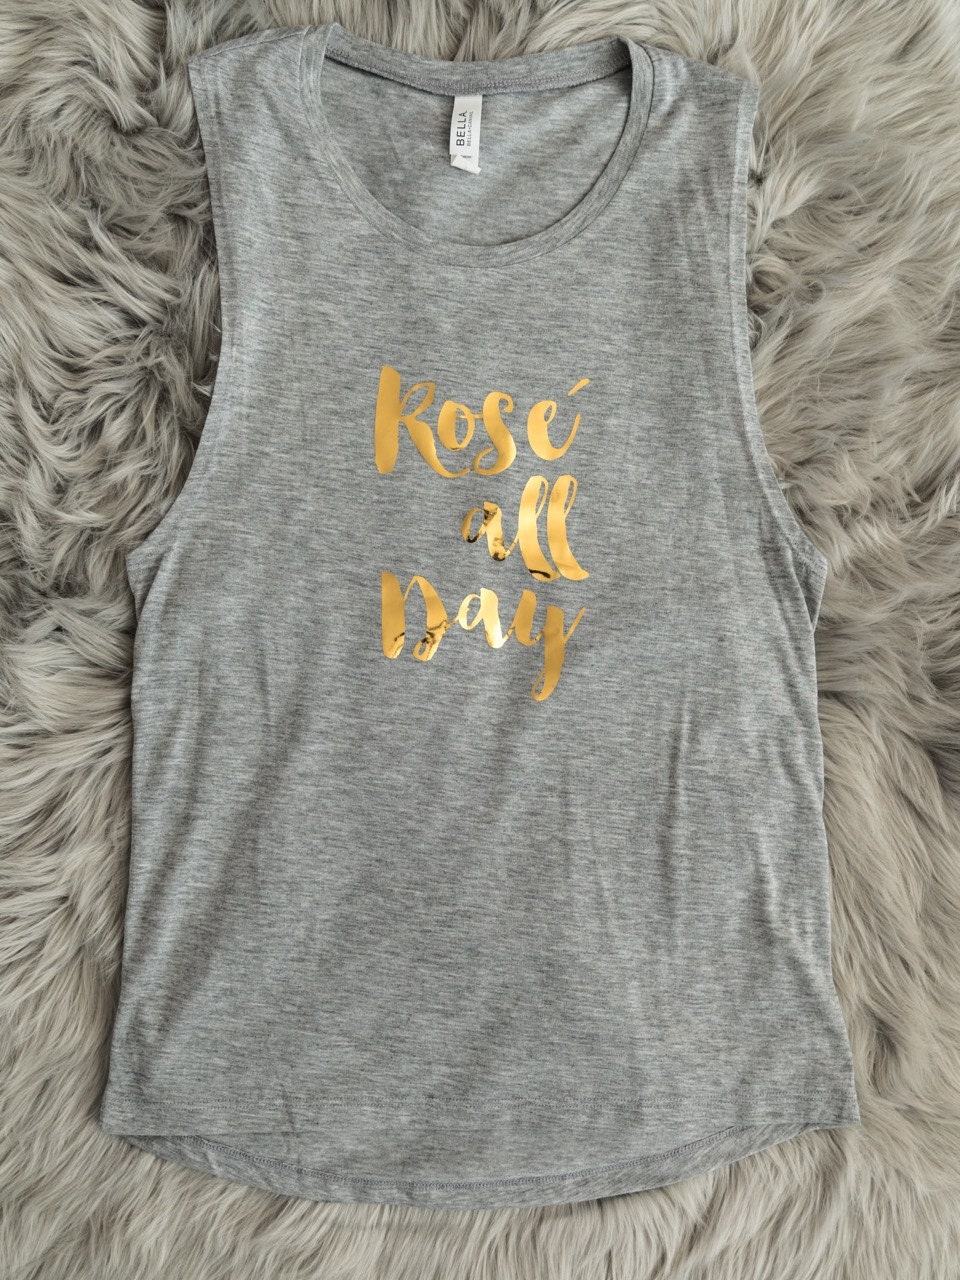 Rose all Day Shirts, Rose all Day Flowy Muscle Tank // Bridal Shower Shirts, Bachelorette Party Shirts, Bridesmaids Shirts / 8803